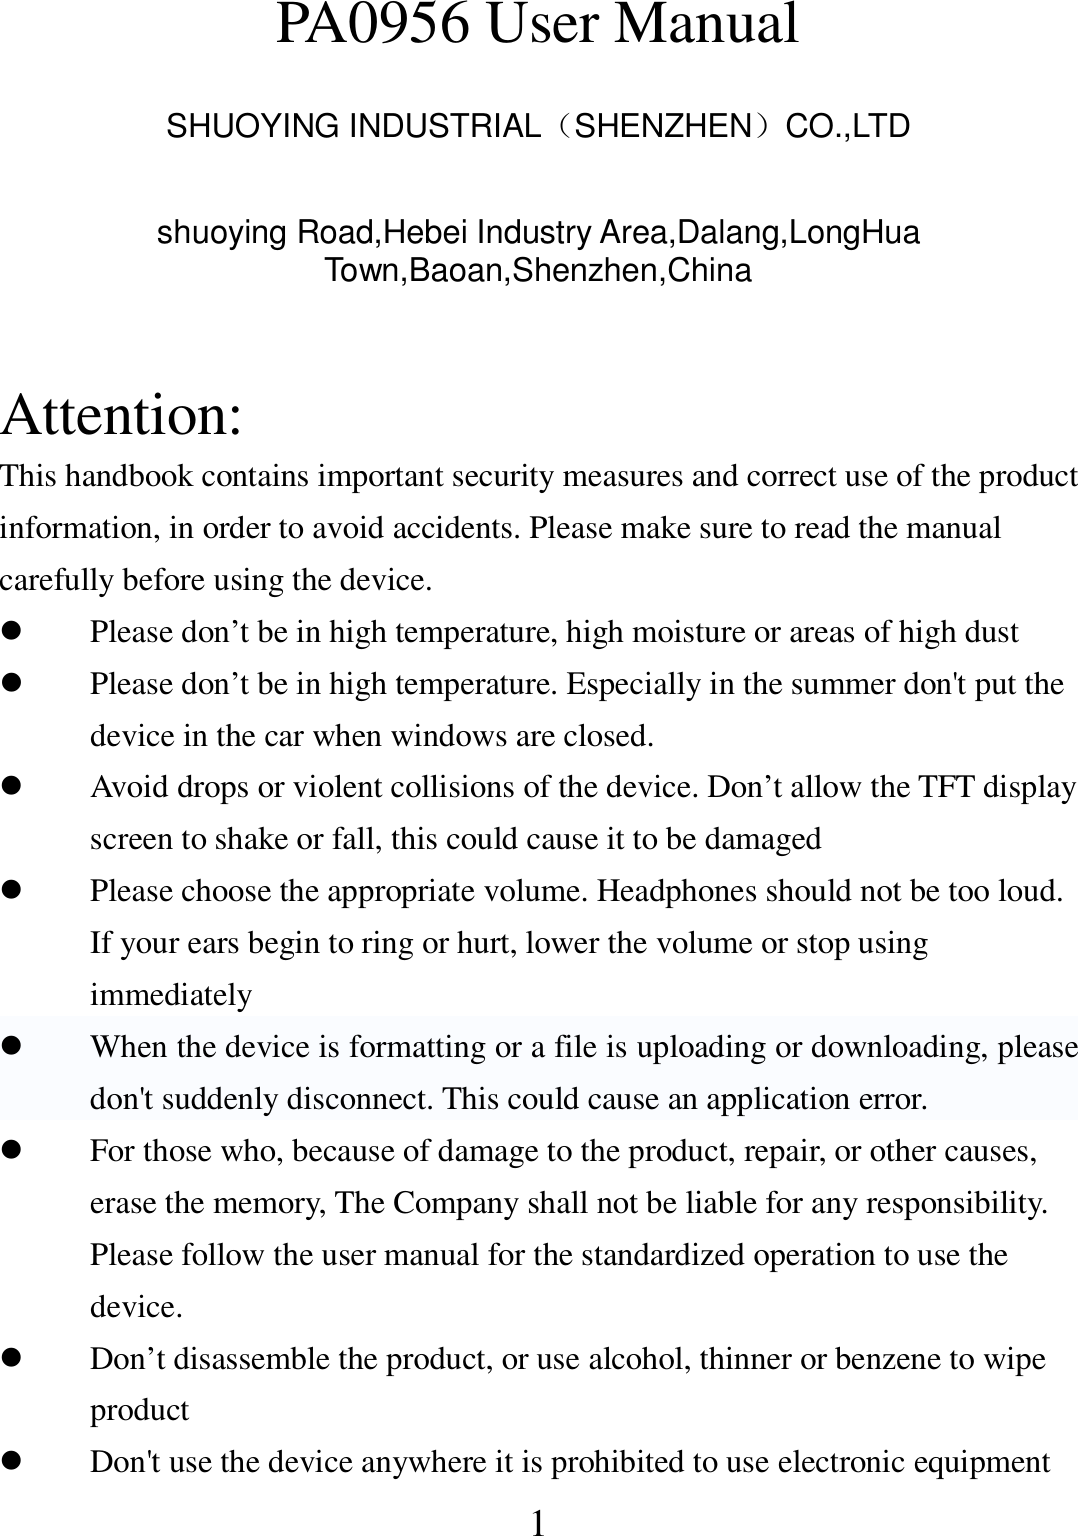   1 PA0956 User Manual  SHUOYING INDUSTRIAL（SHENZHEN）CO.,LTD  shuoying Road,Hebei Industry Area,Dalang,LongHua Town,Baoan,Shenzhen,China   Attention: This handbook contains important security measures and correct use of the product information, in order to avoid accidents. Please make sure to read the manual carefully before using the device.  Please don’t be in high temperature, high moisture or areas of high dust  Please don’t be in high temperature. Especially in the summer don&apos;t put the device in the car when windows are closed.  Avoid drops or violent collisions of the device. Don’t allow the TFT display screen to shake or fall, this could cause it to be damaged  Please choose the appropriate volume. Headphones should not be too loud. If your ears begin to ring or hurt, lower the volume or stop using immediately  When the device is formatting or a file is uploading or downloading, please don&apos;t suddenly disconnect. This could cause an application error.  For those who, because of damage to the product, repair, or other causes, erase the memory, The Company shall not be liable for any responsibility. Please follow the user manual for the standardized operation to use the device.  Don’t disassemble the product, or use alcohol, thinner or benzene to wipe product  Don&apos;t use the device anywhere it is prohibited to use electronic equipment 